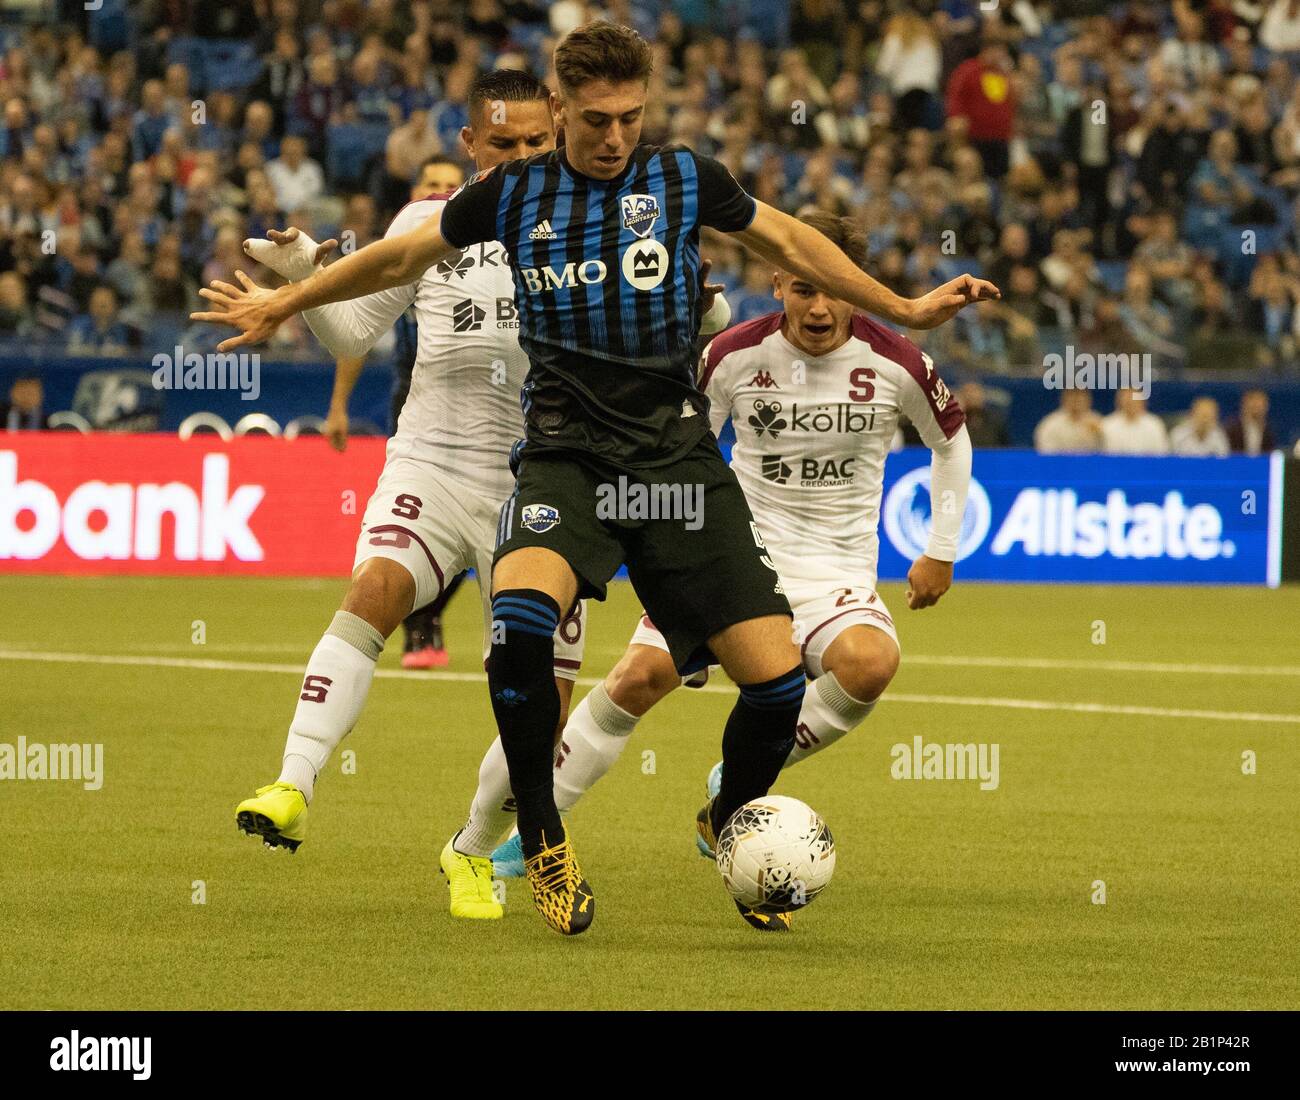 Montreal, Quebec, Canada. 26th Feb, 2020. Montreal Impact #5 Luis Binks Deportivo Saprissa #8 David Guzmán and # #27 Manfred Ugalde during the first half in a CONCACAF Champions League soccer match. Credit: Patrice Lapointe/ZUMA Wire/Alamy Live News Stock Photo